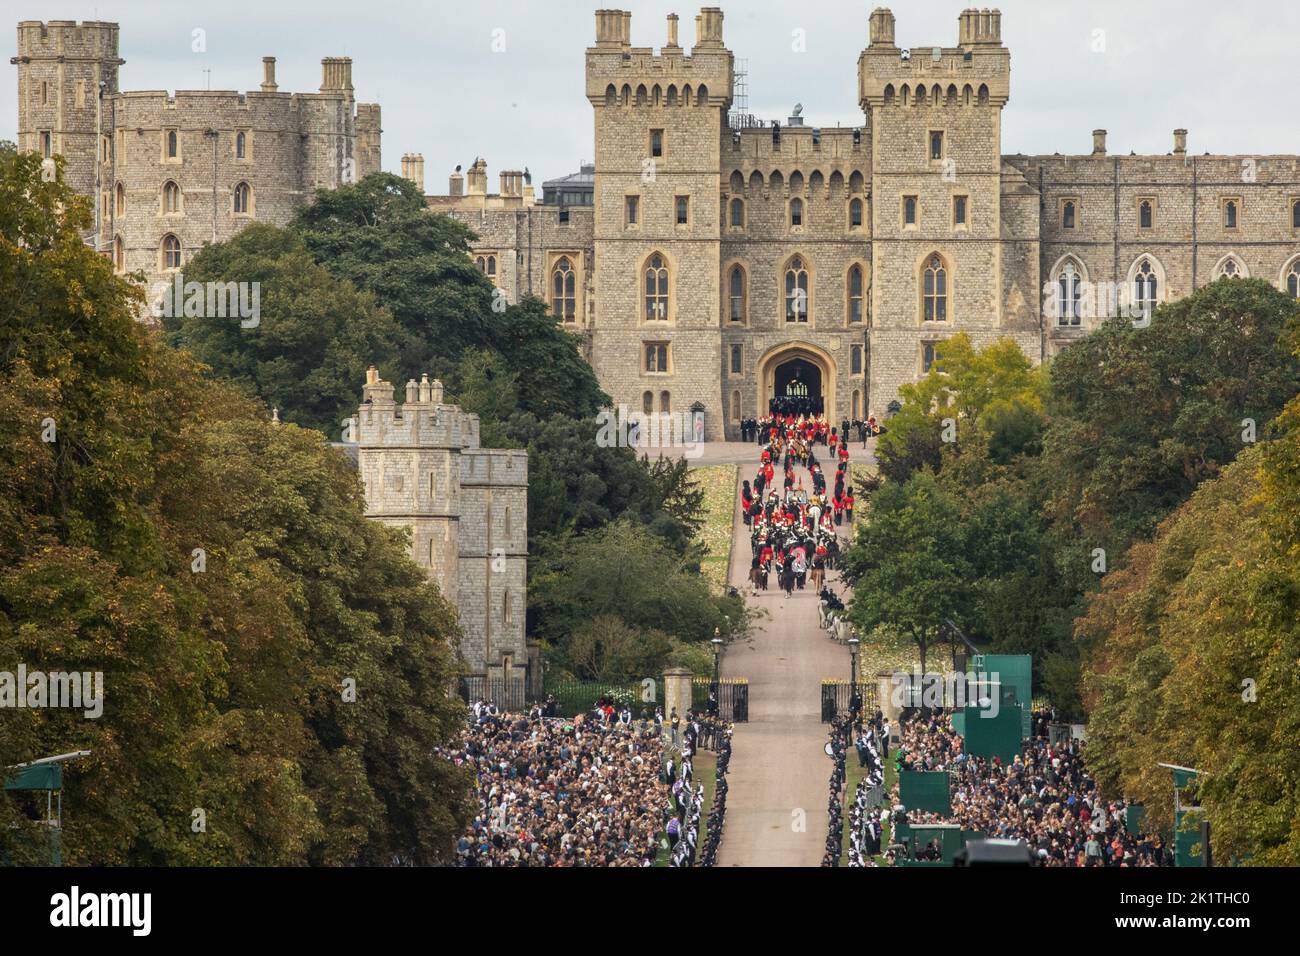 Windsor, UK. 19th September, 2022. The procession of Queen Elizabeth II's coffin carried in the State Hearse enters Cambridge Gate for a Committal Service in St George’s Chapel. Queen Elizabeth II, the UK's longest-serving monarch, died at Balmoral aged 96 on 8th September 2022 after a reign lasting 70 years. Credit: Mark Kerrison/Alamy Live News Stock Photo